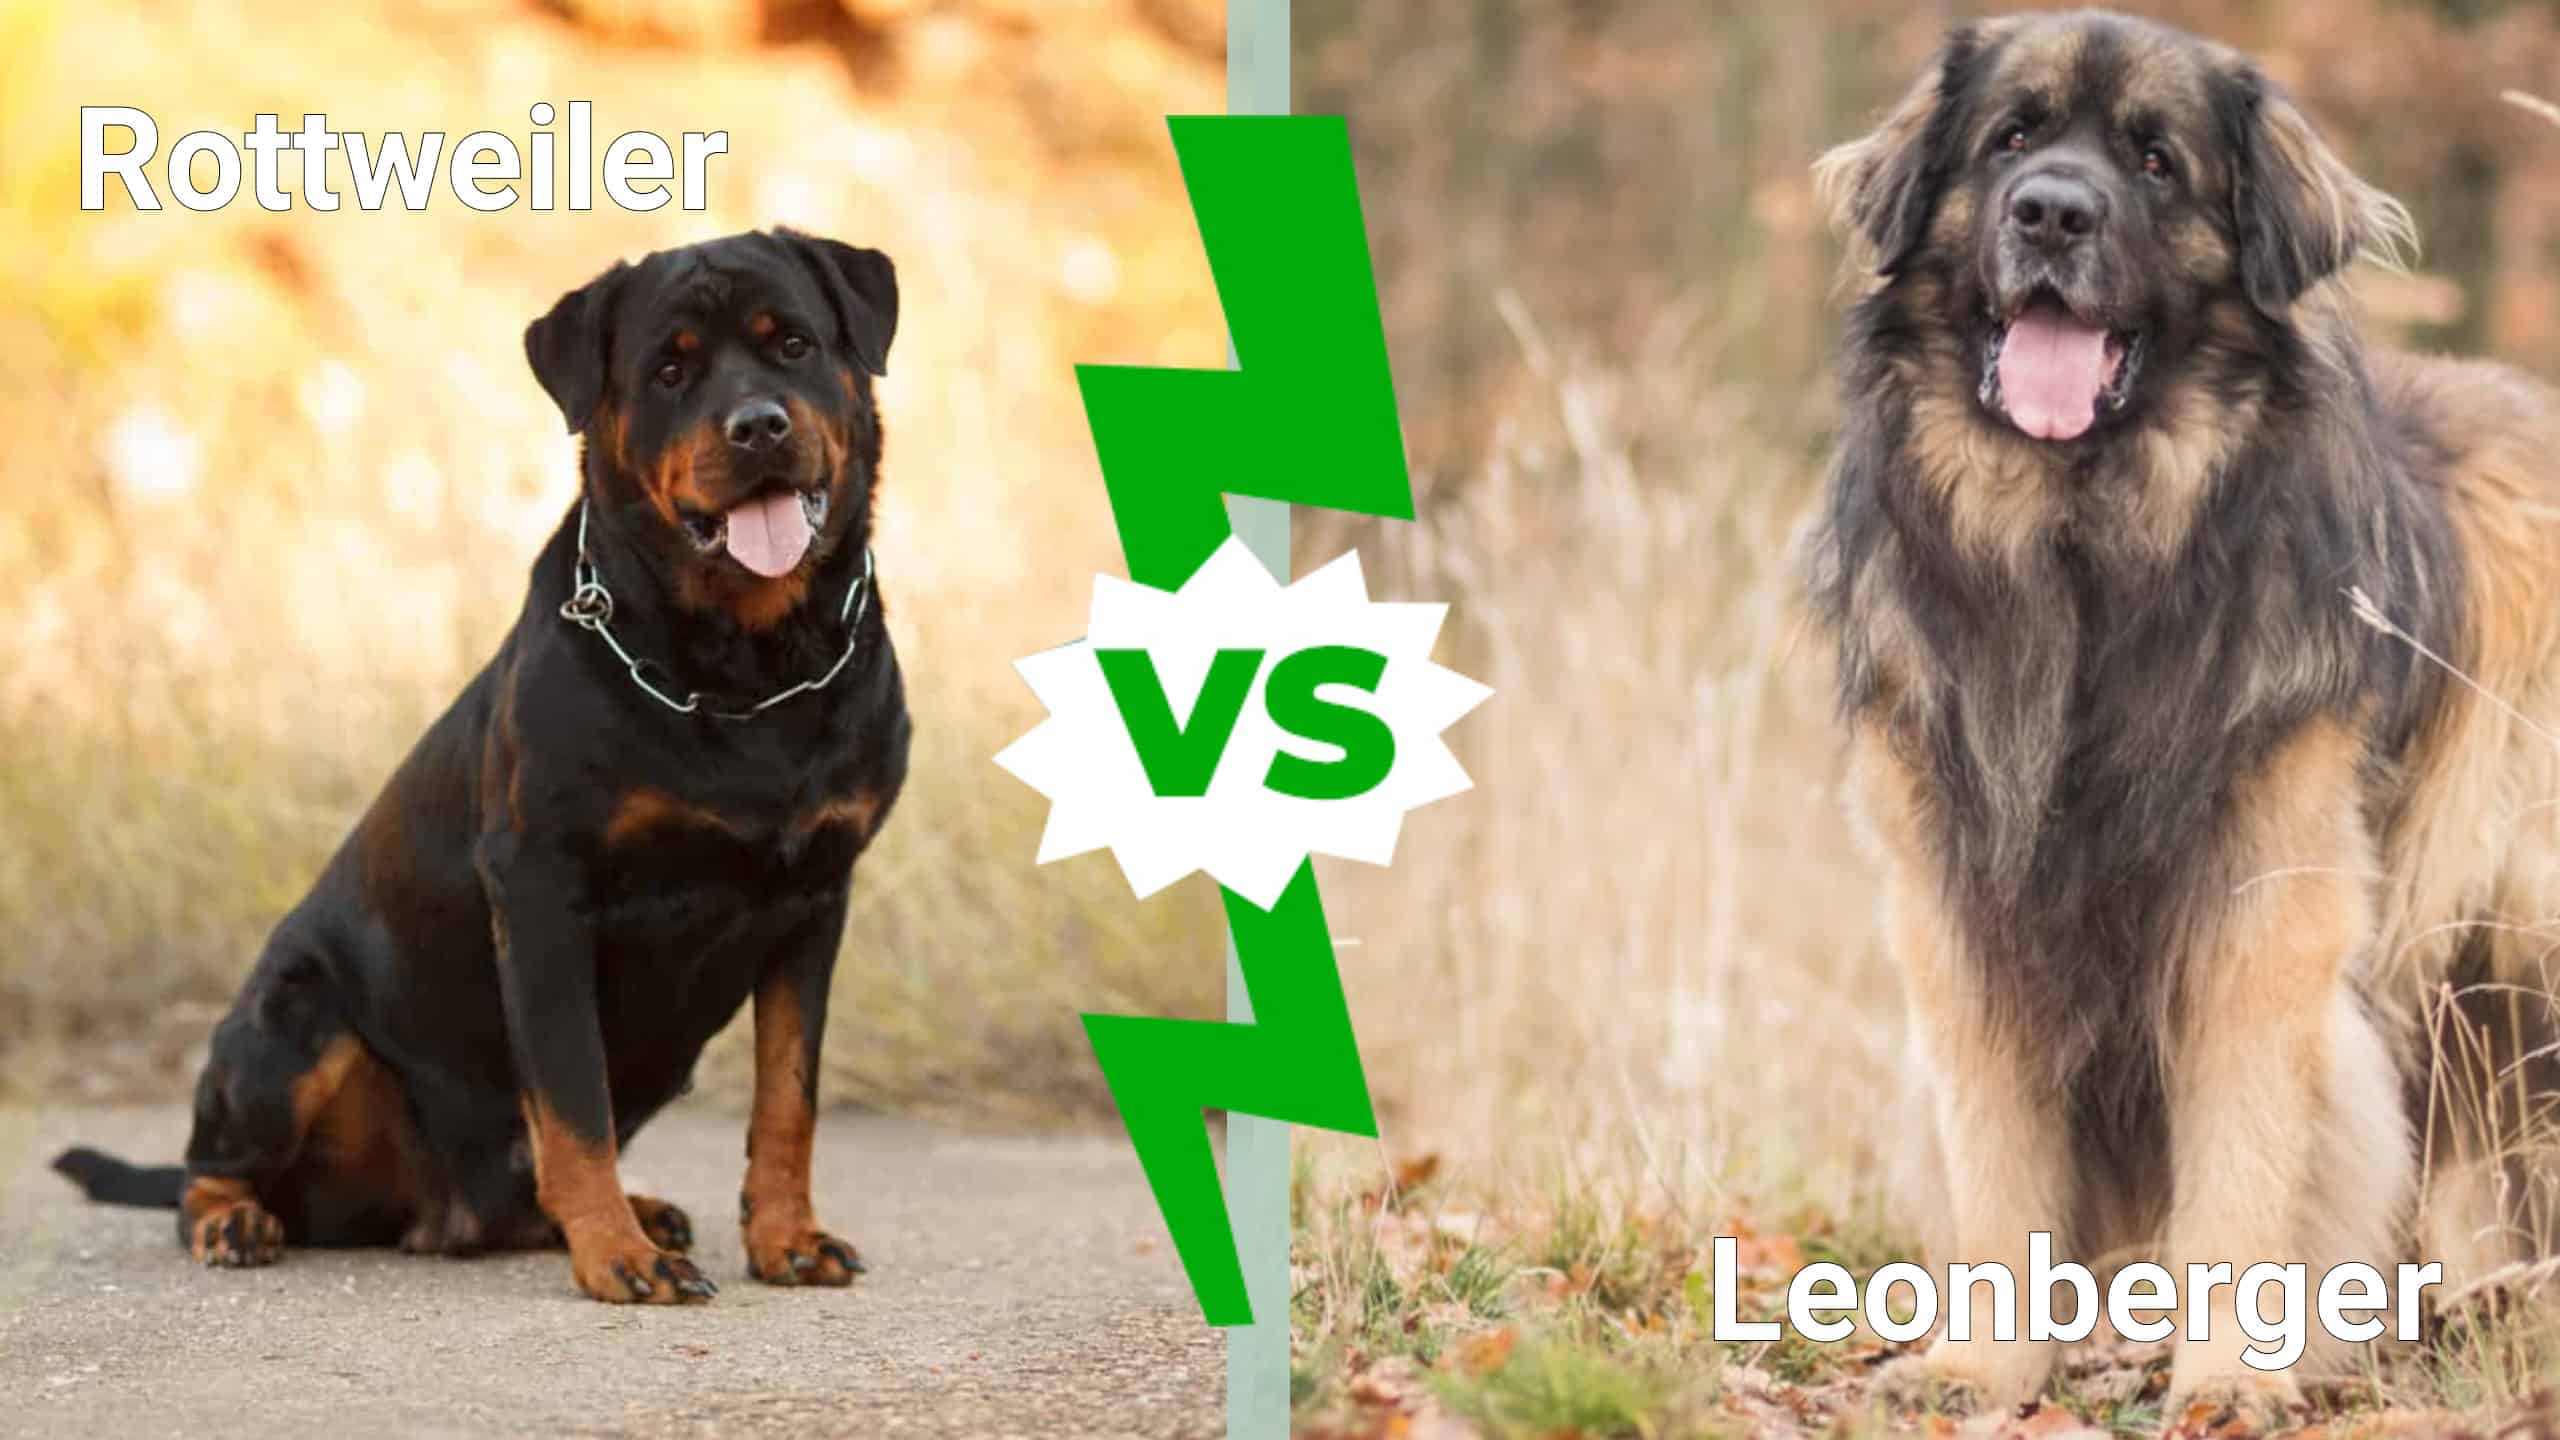 Rottweiler and Leonberger side by side in nature